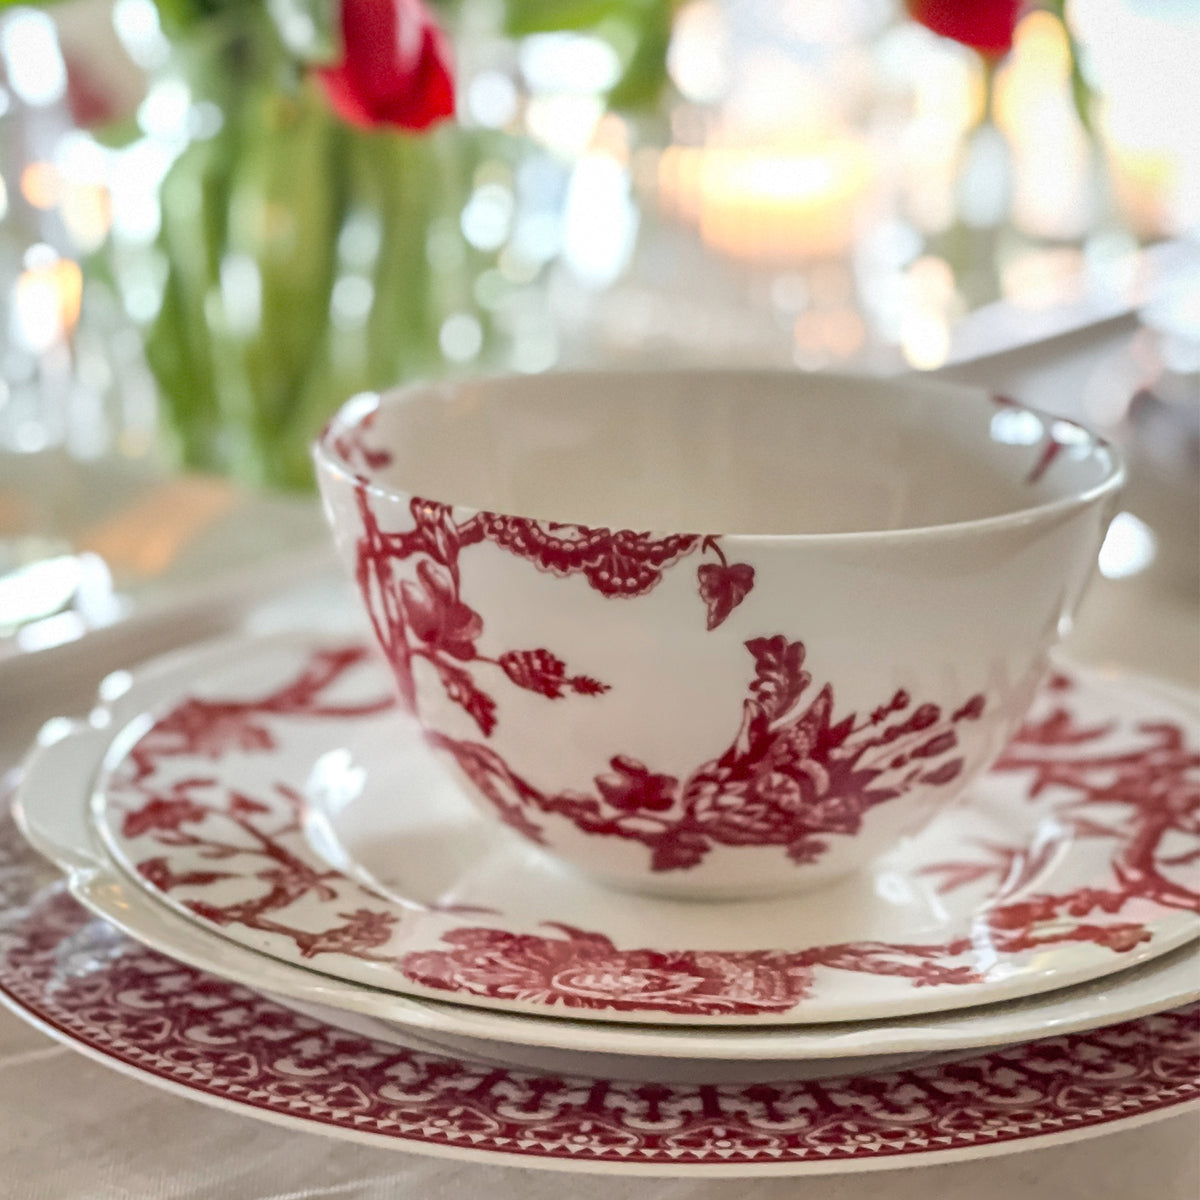 A white porcelain Arcadia Crimson Cereal Bowl by Caskata with red floral patterns, placed on a matching plate, set on a table with a blurred background. Part of the Williamsburg Foundation&#39;s premium porcelain dinnerware collection.